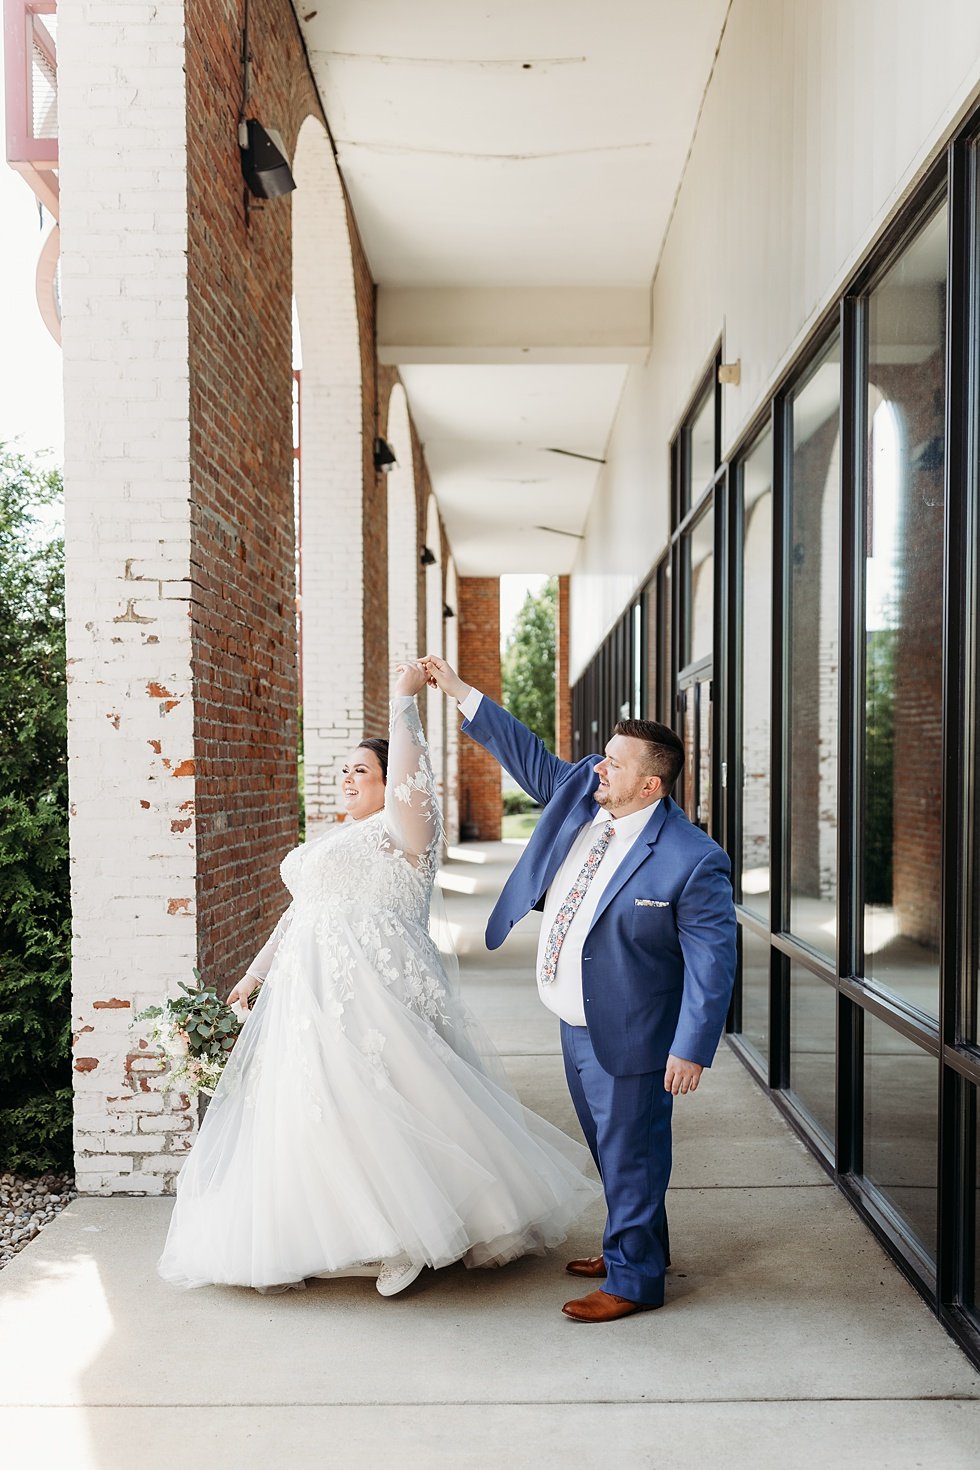  Bride and Groom portraits on wedding day. Spring wedding at The Refinery Jeffersonville, Indiana 